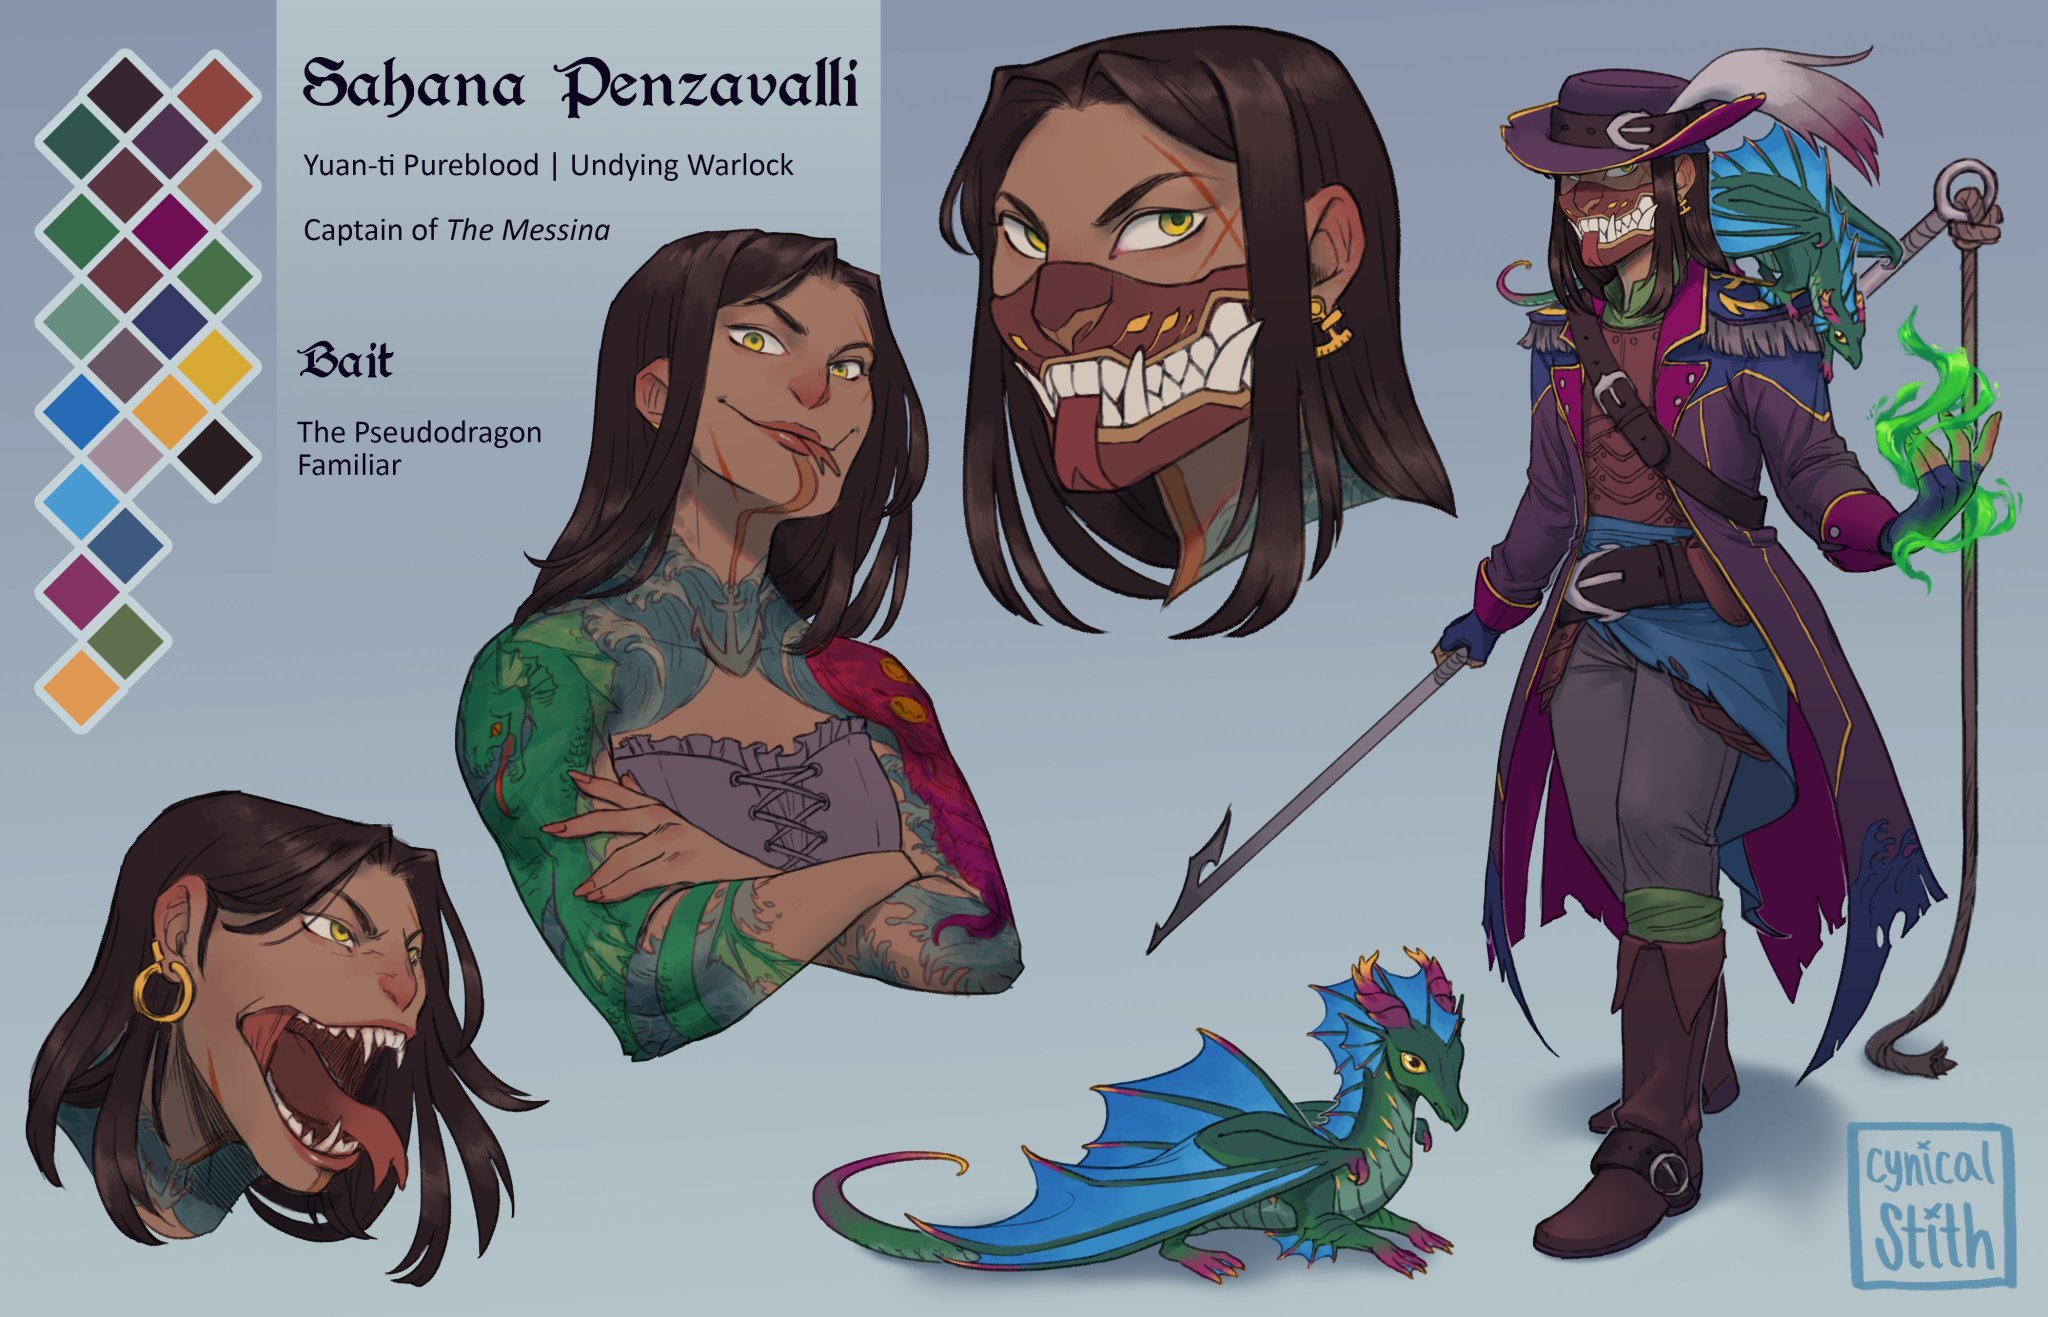 “A reference sheet commission of a Yuan-ti Pureblood warlock pirate captain...